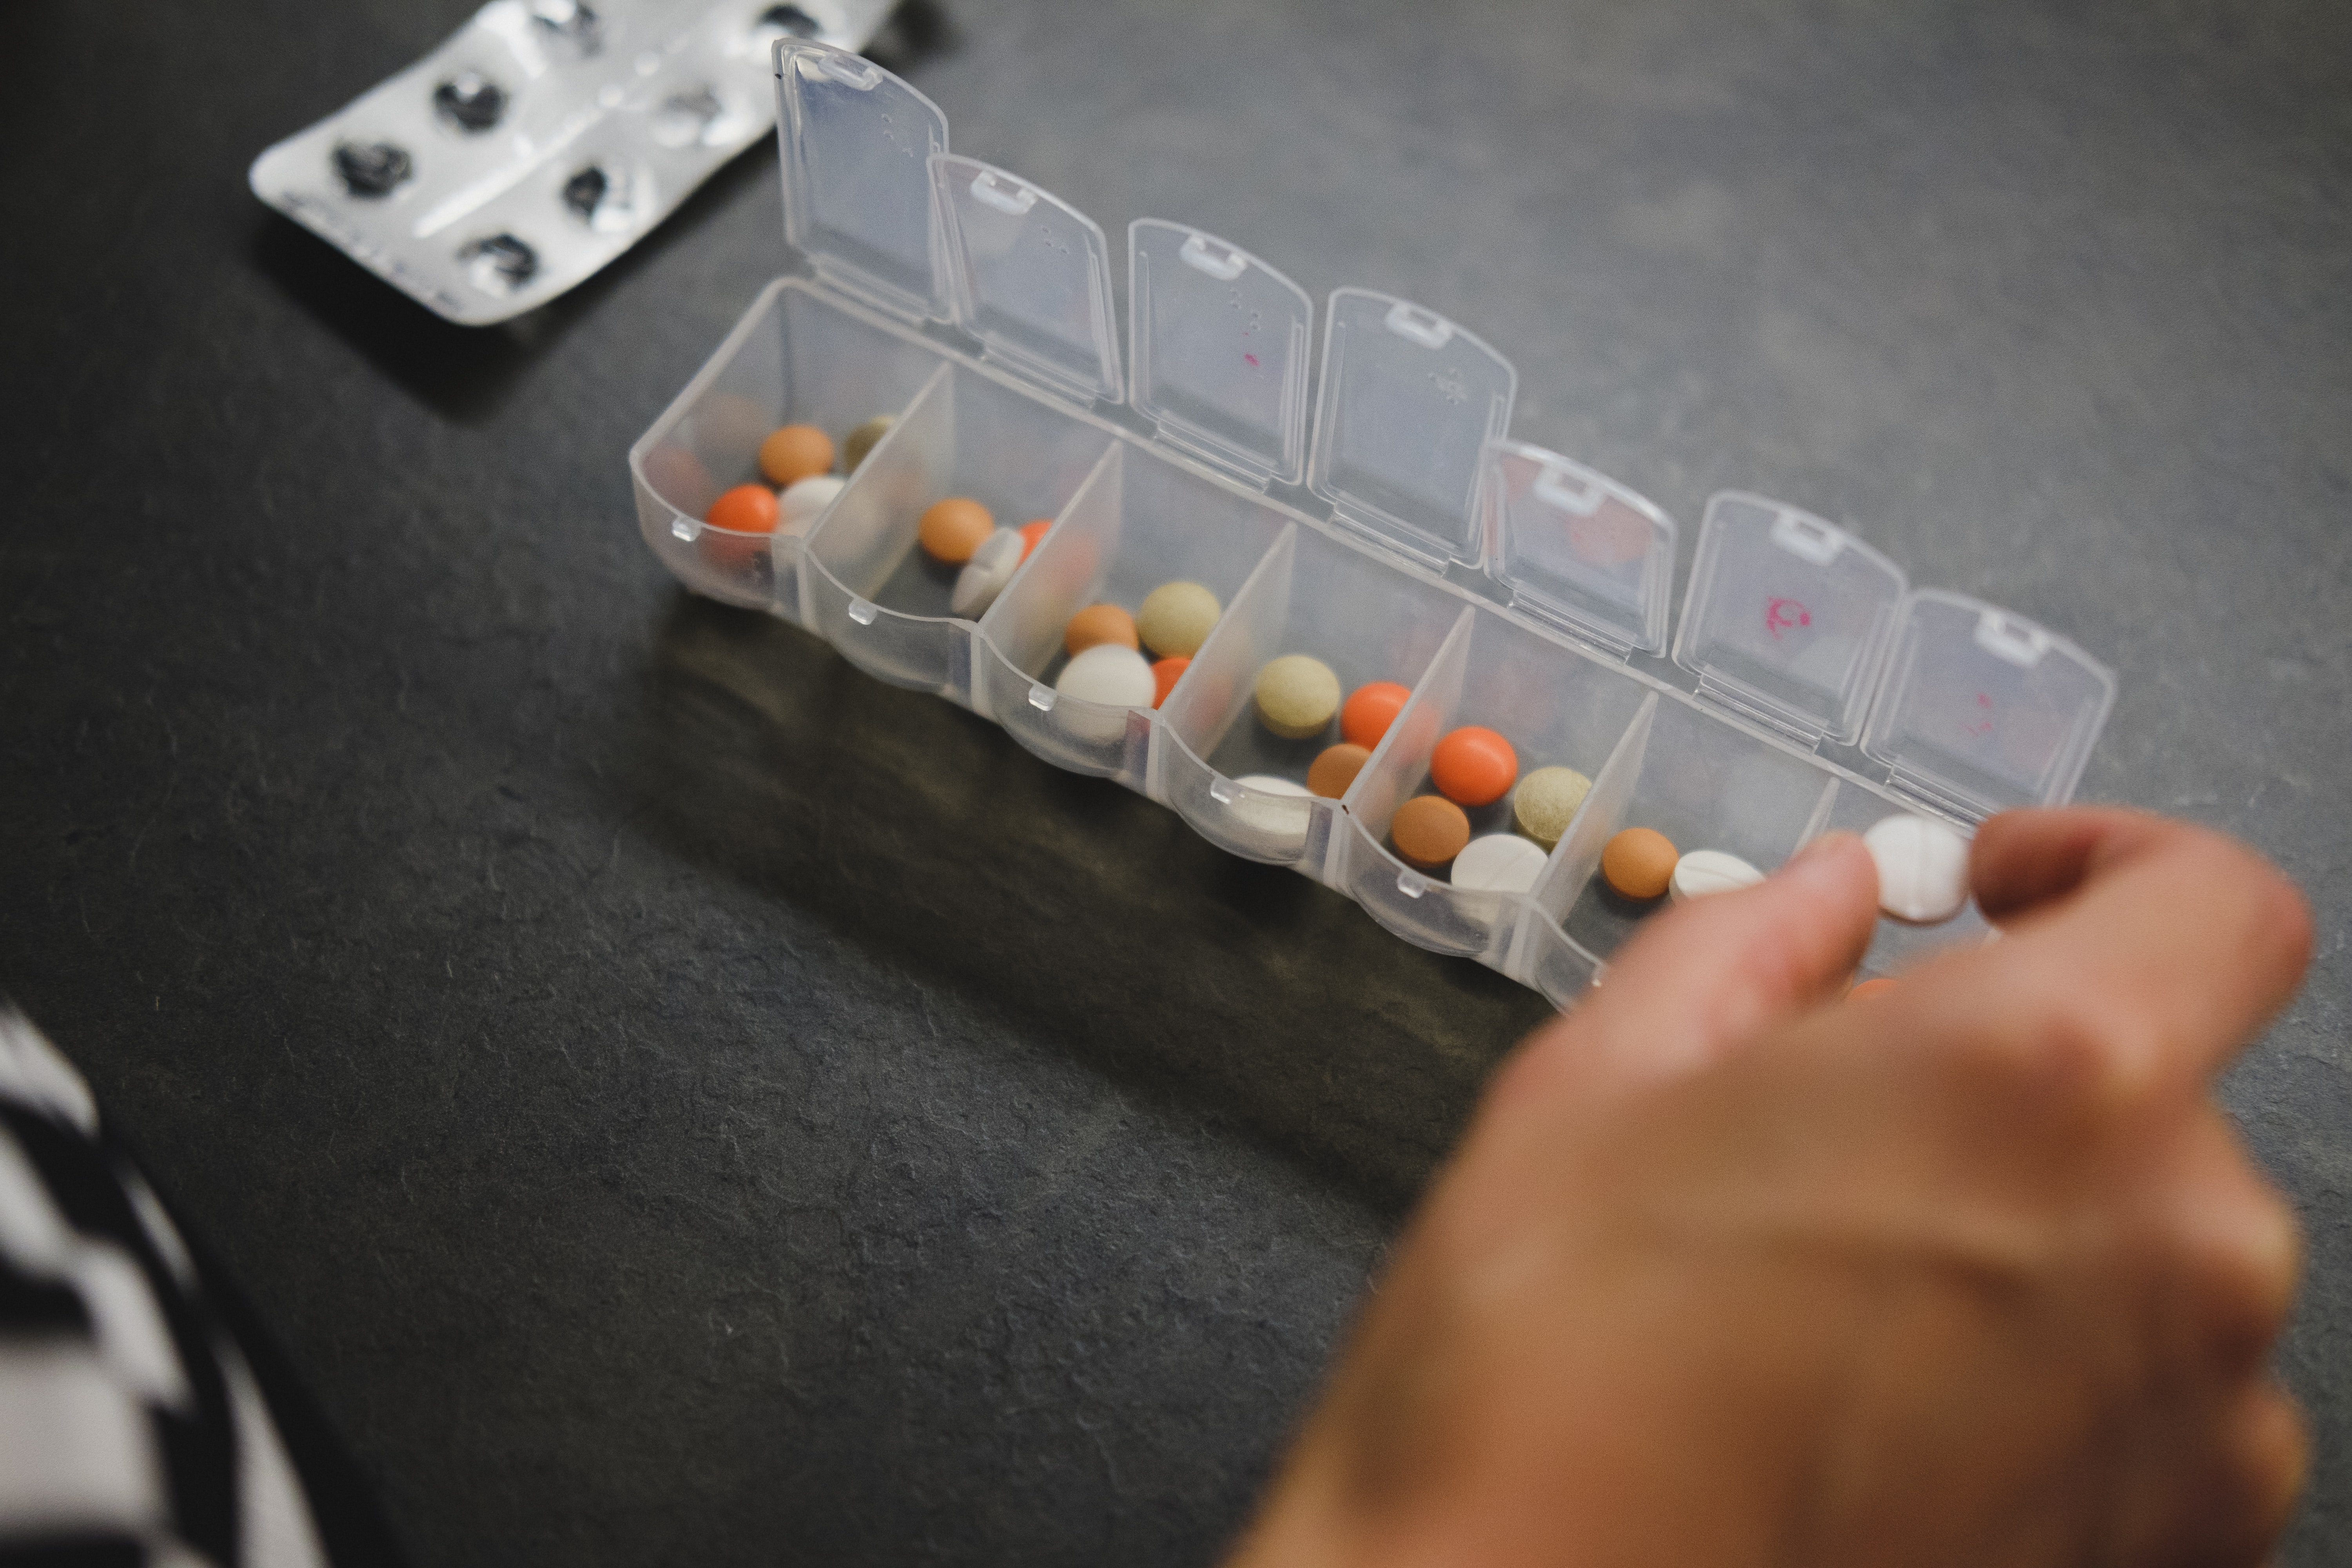 Where there’s a pill, there’s a way: How to store and manage your prescriptions